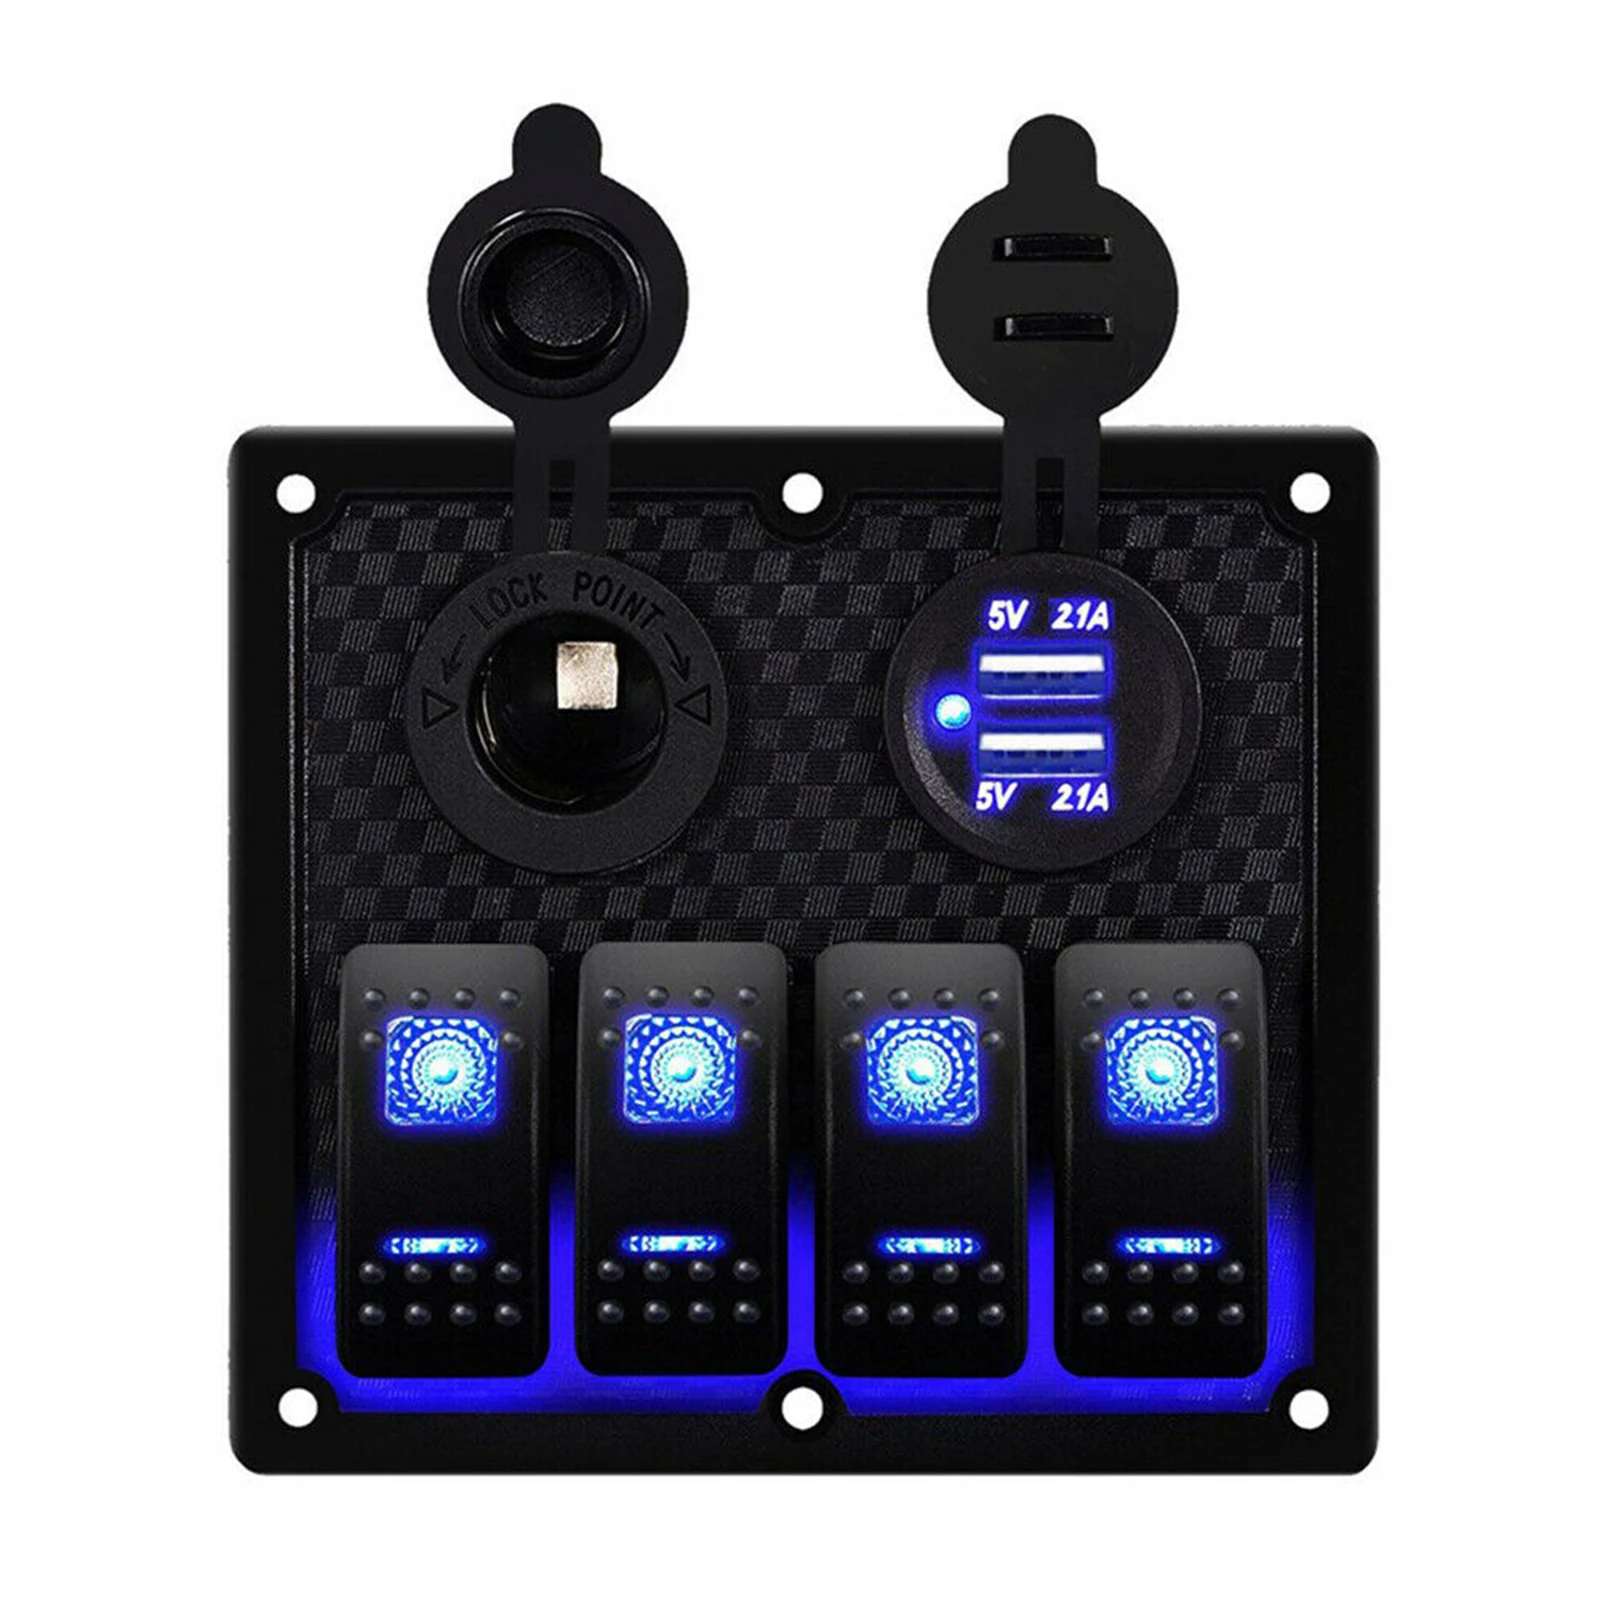 

4 Gang Blue LED Button Rocker Switch Panel Control Dual USB Port Charger Circuit Breaker ON-OFF Toggle Cars Trucks Marine Boats